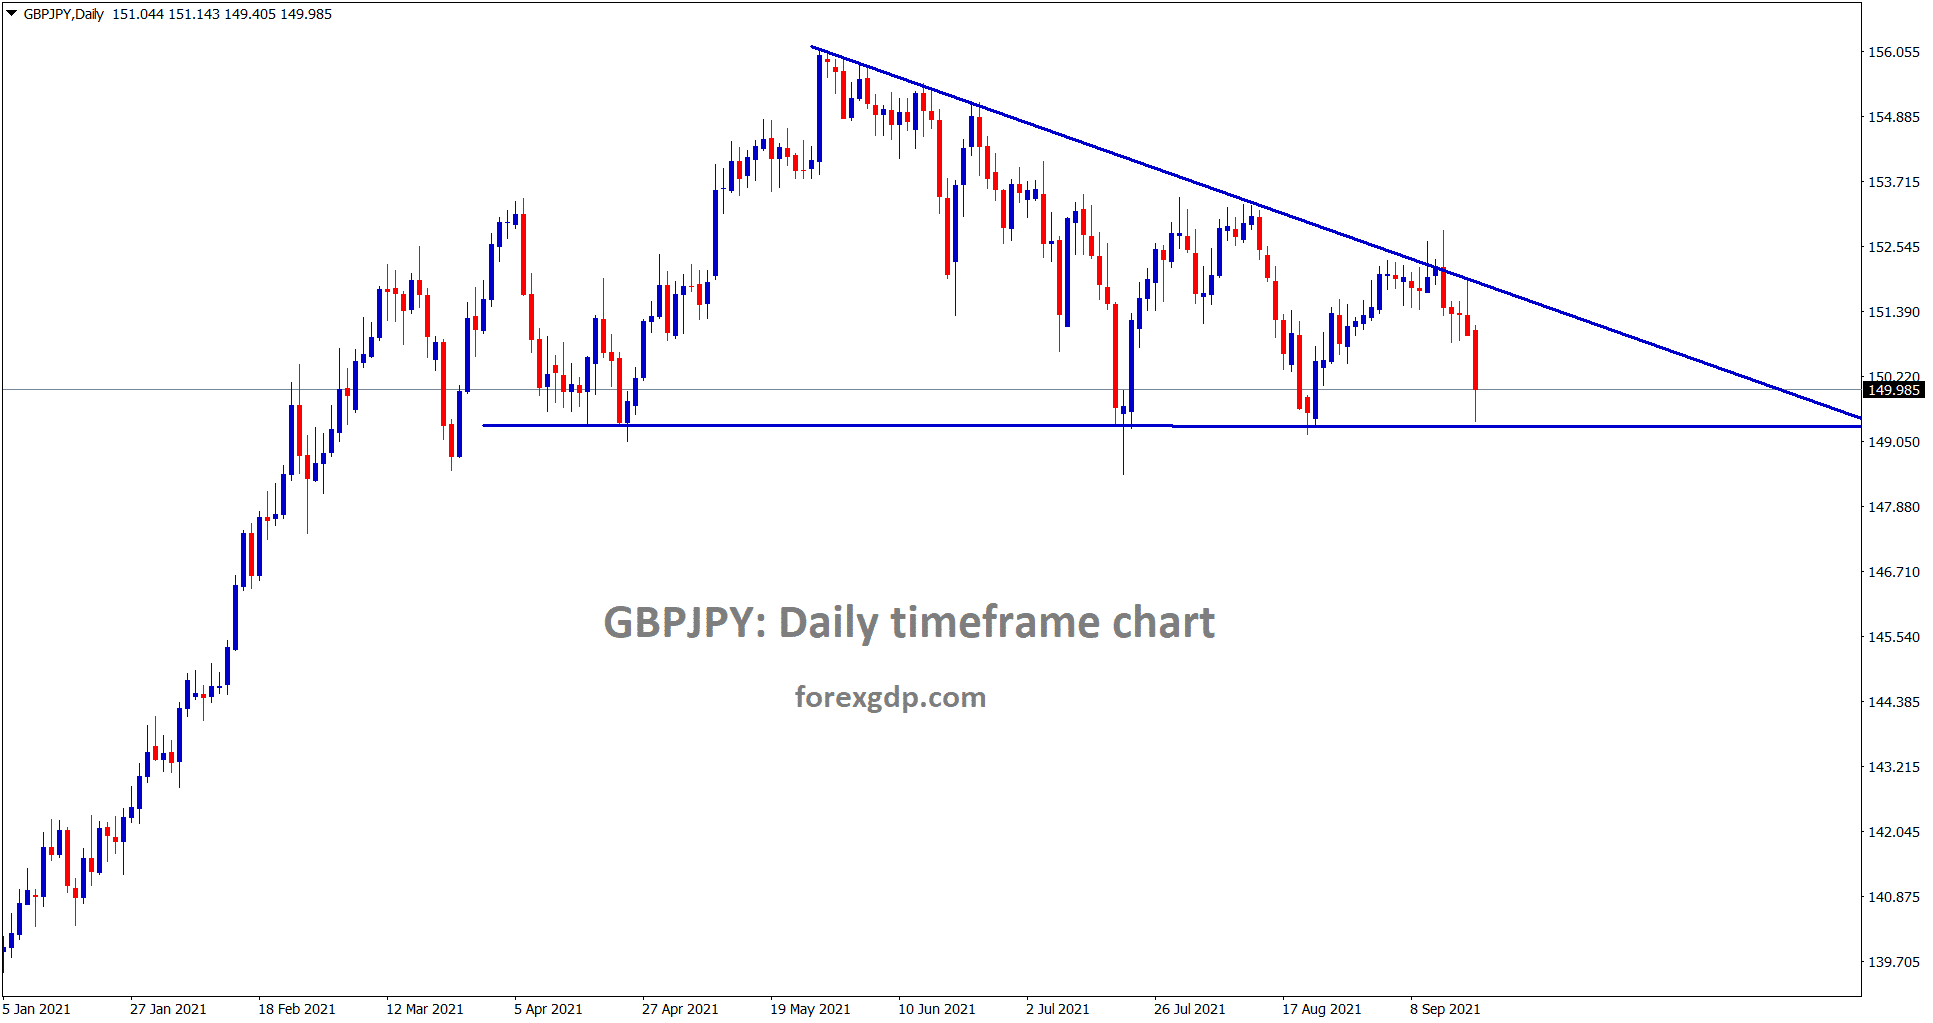 GBPJPY is going to break the descending triangle soon